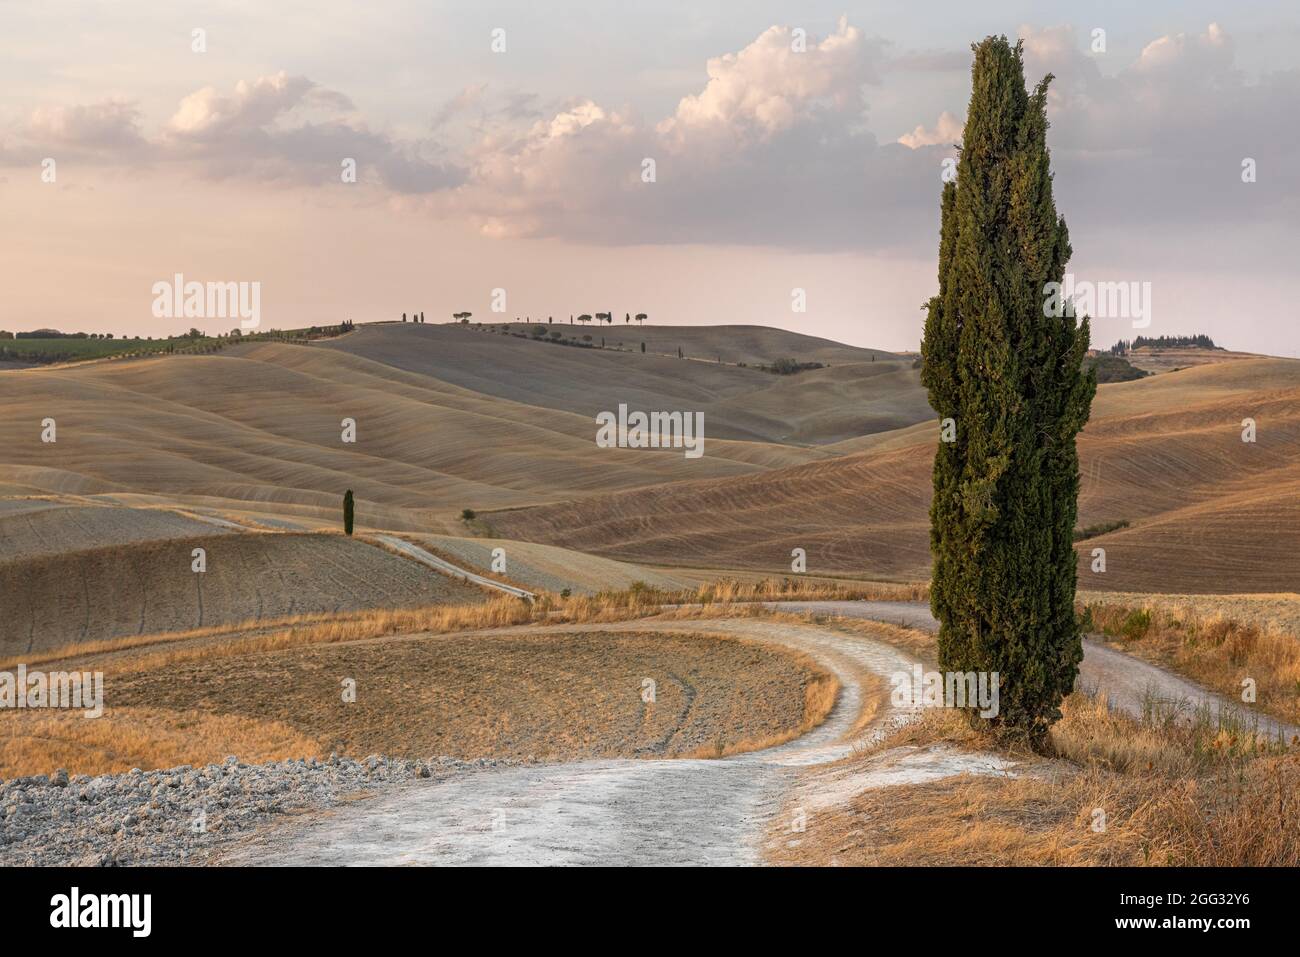 Iconic tuscanian summer landscape, with a cypress and a dirt path curving between distant hills Stock Photo